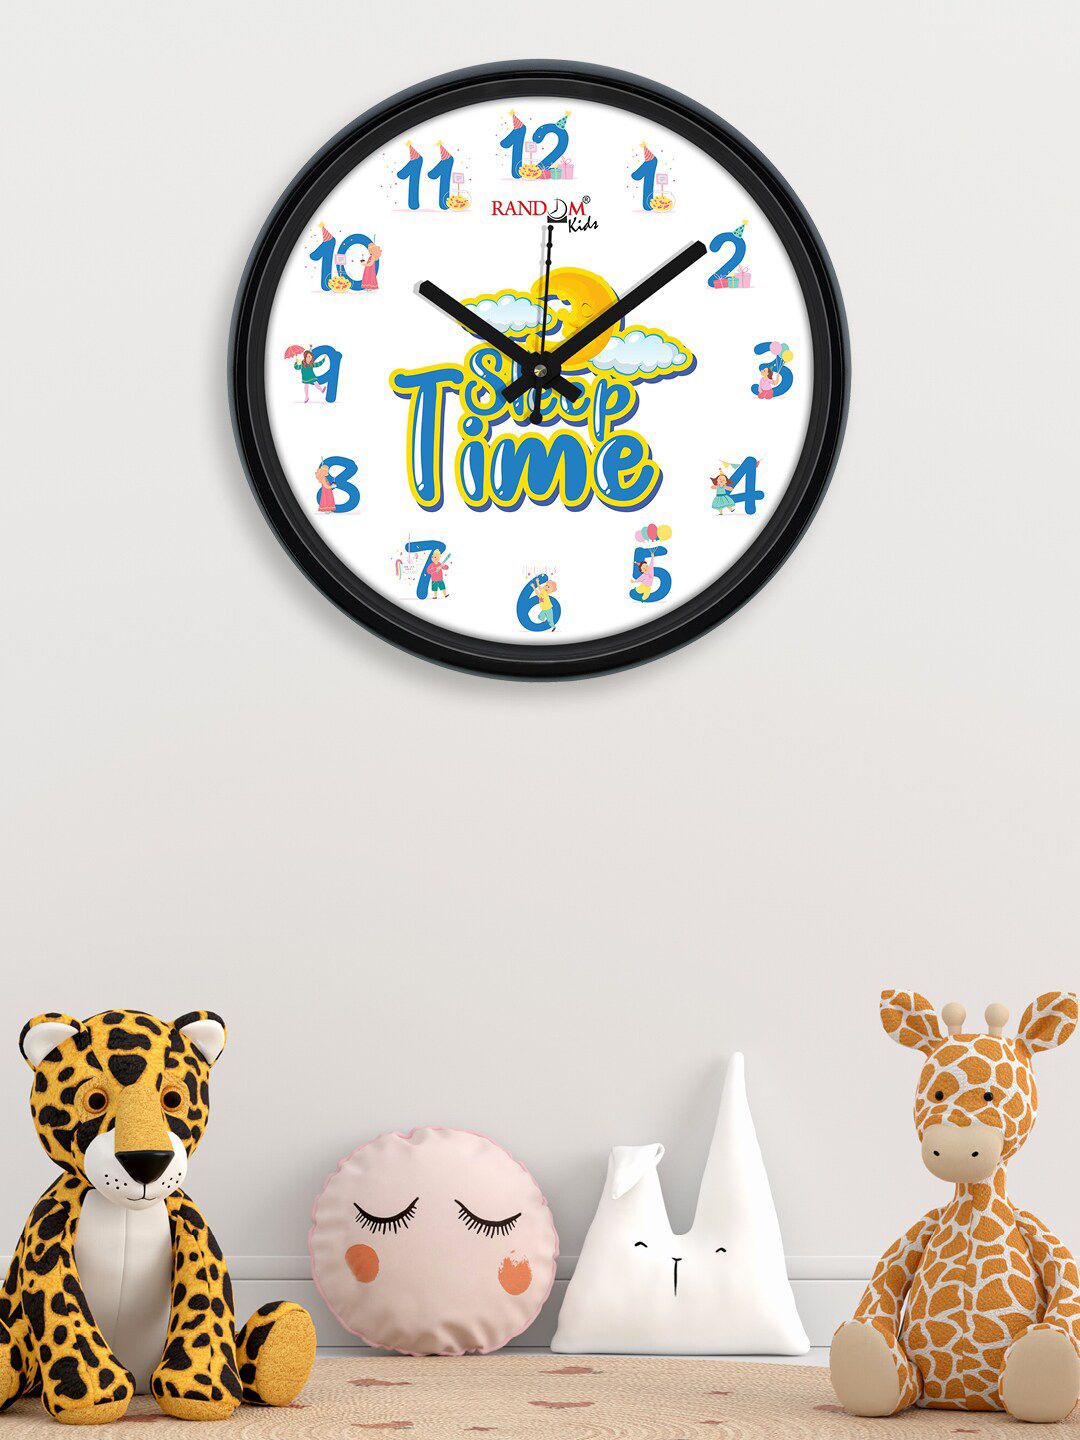 RANDOM Off White & Blue Sleep Time Printed Contemporary Wall Clock Price in India